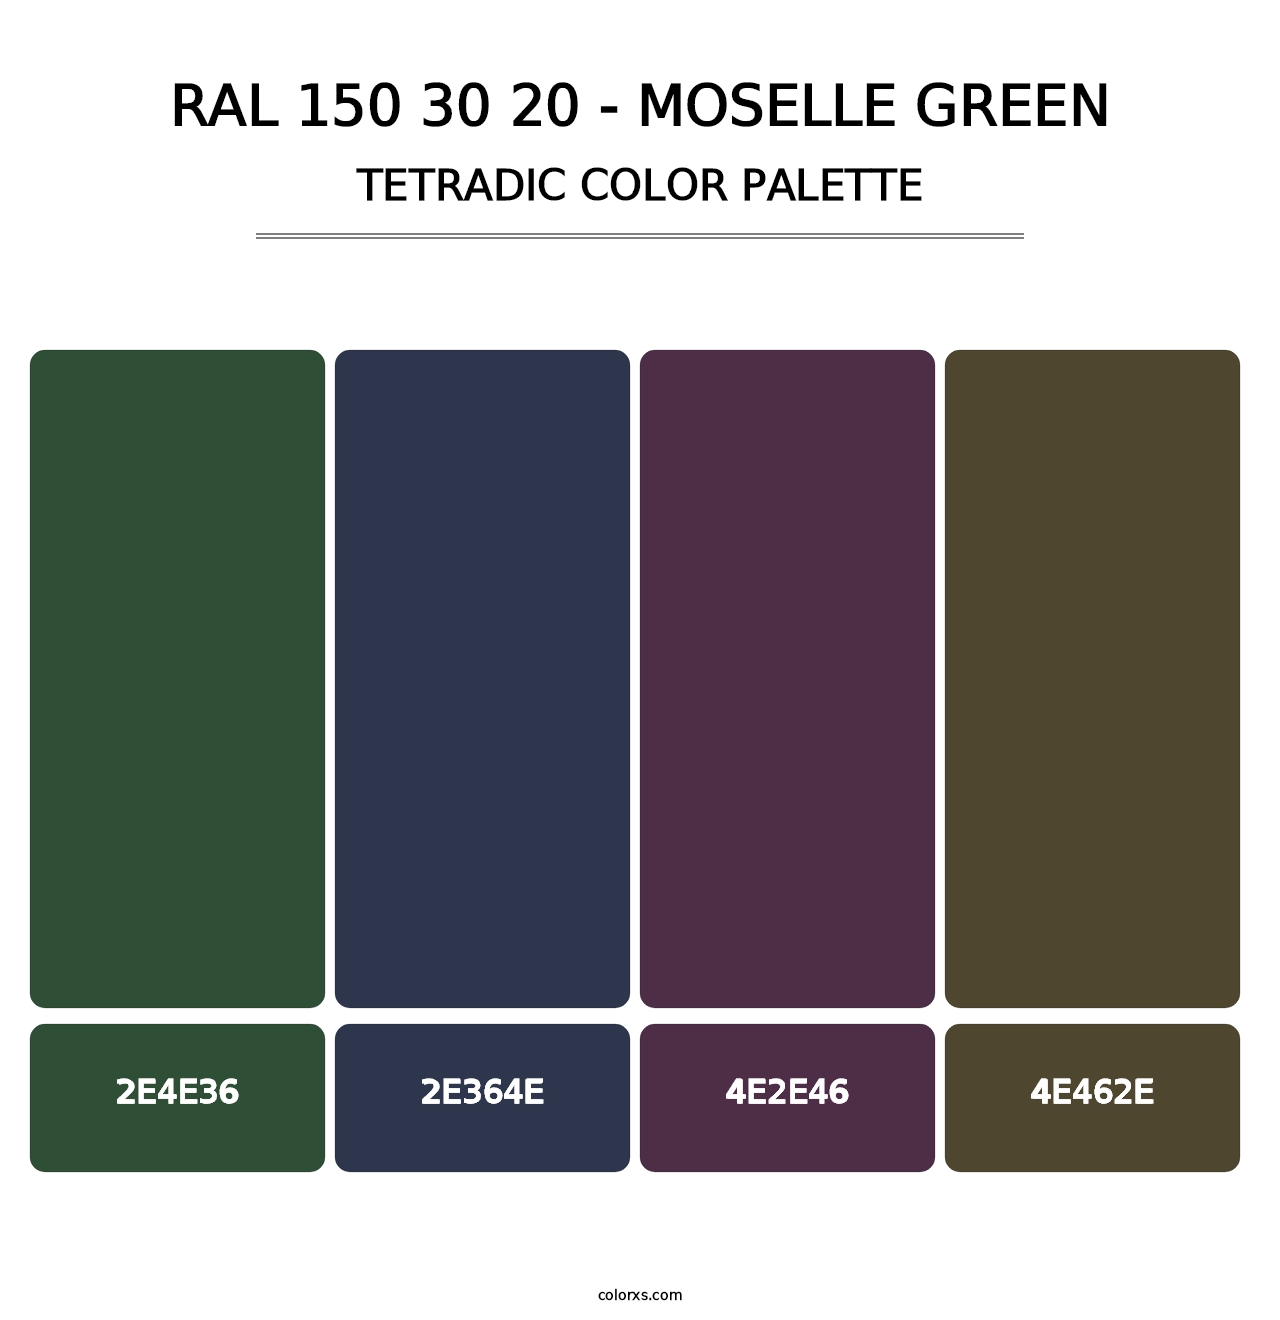 RAL 150 30 20 - Moselle Green - Tetradic Color Palette